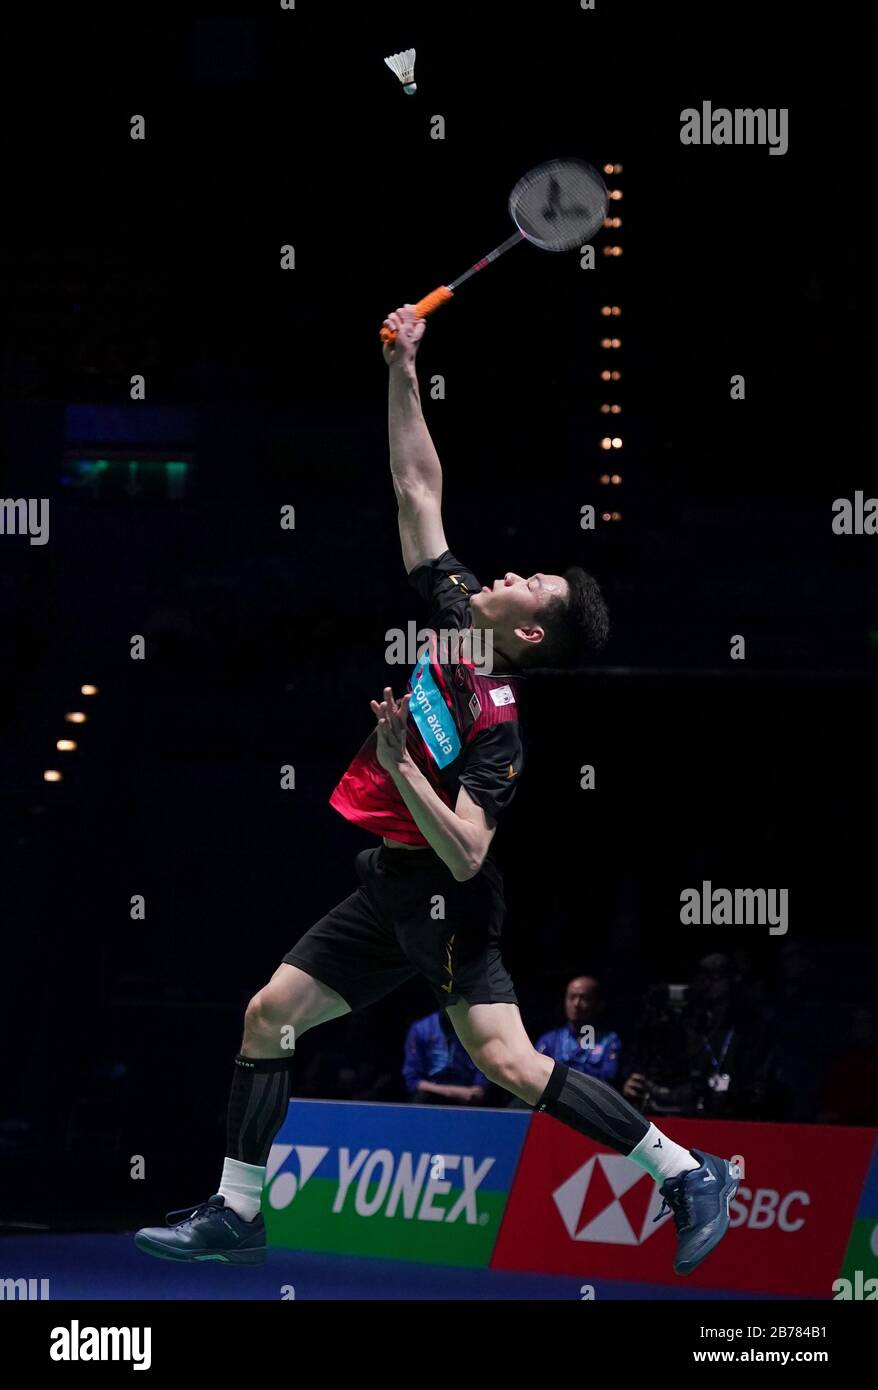 Malaysia S Lee Zii Jia In Action In The Men S Singles Match During The Yonex All England Open Badminton Championships At Arena Birmingham Stock Photo Alamy